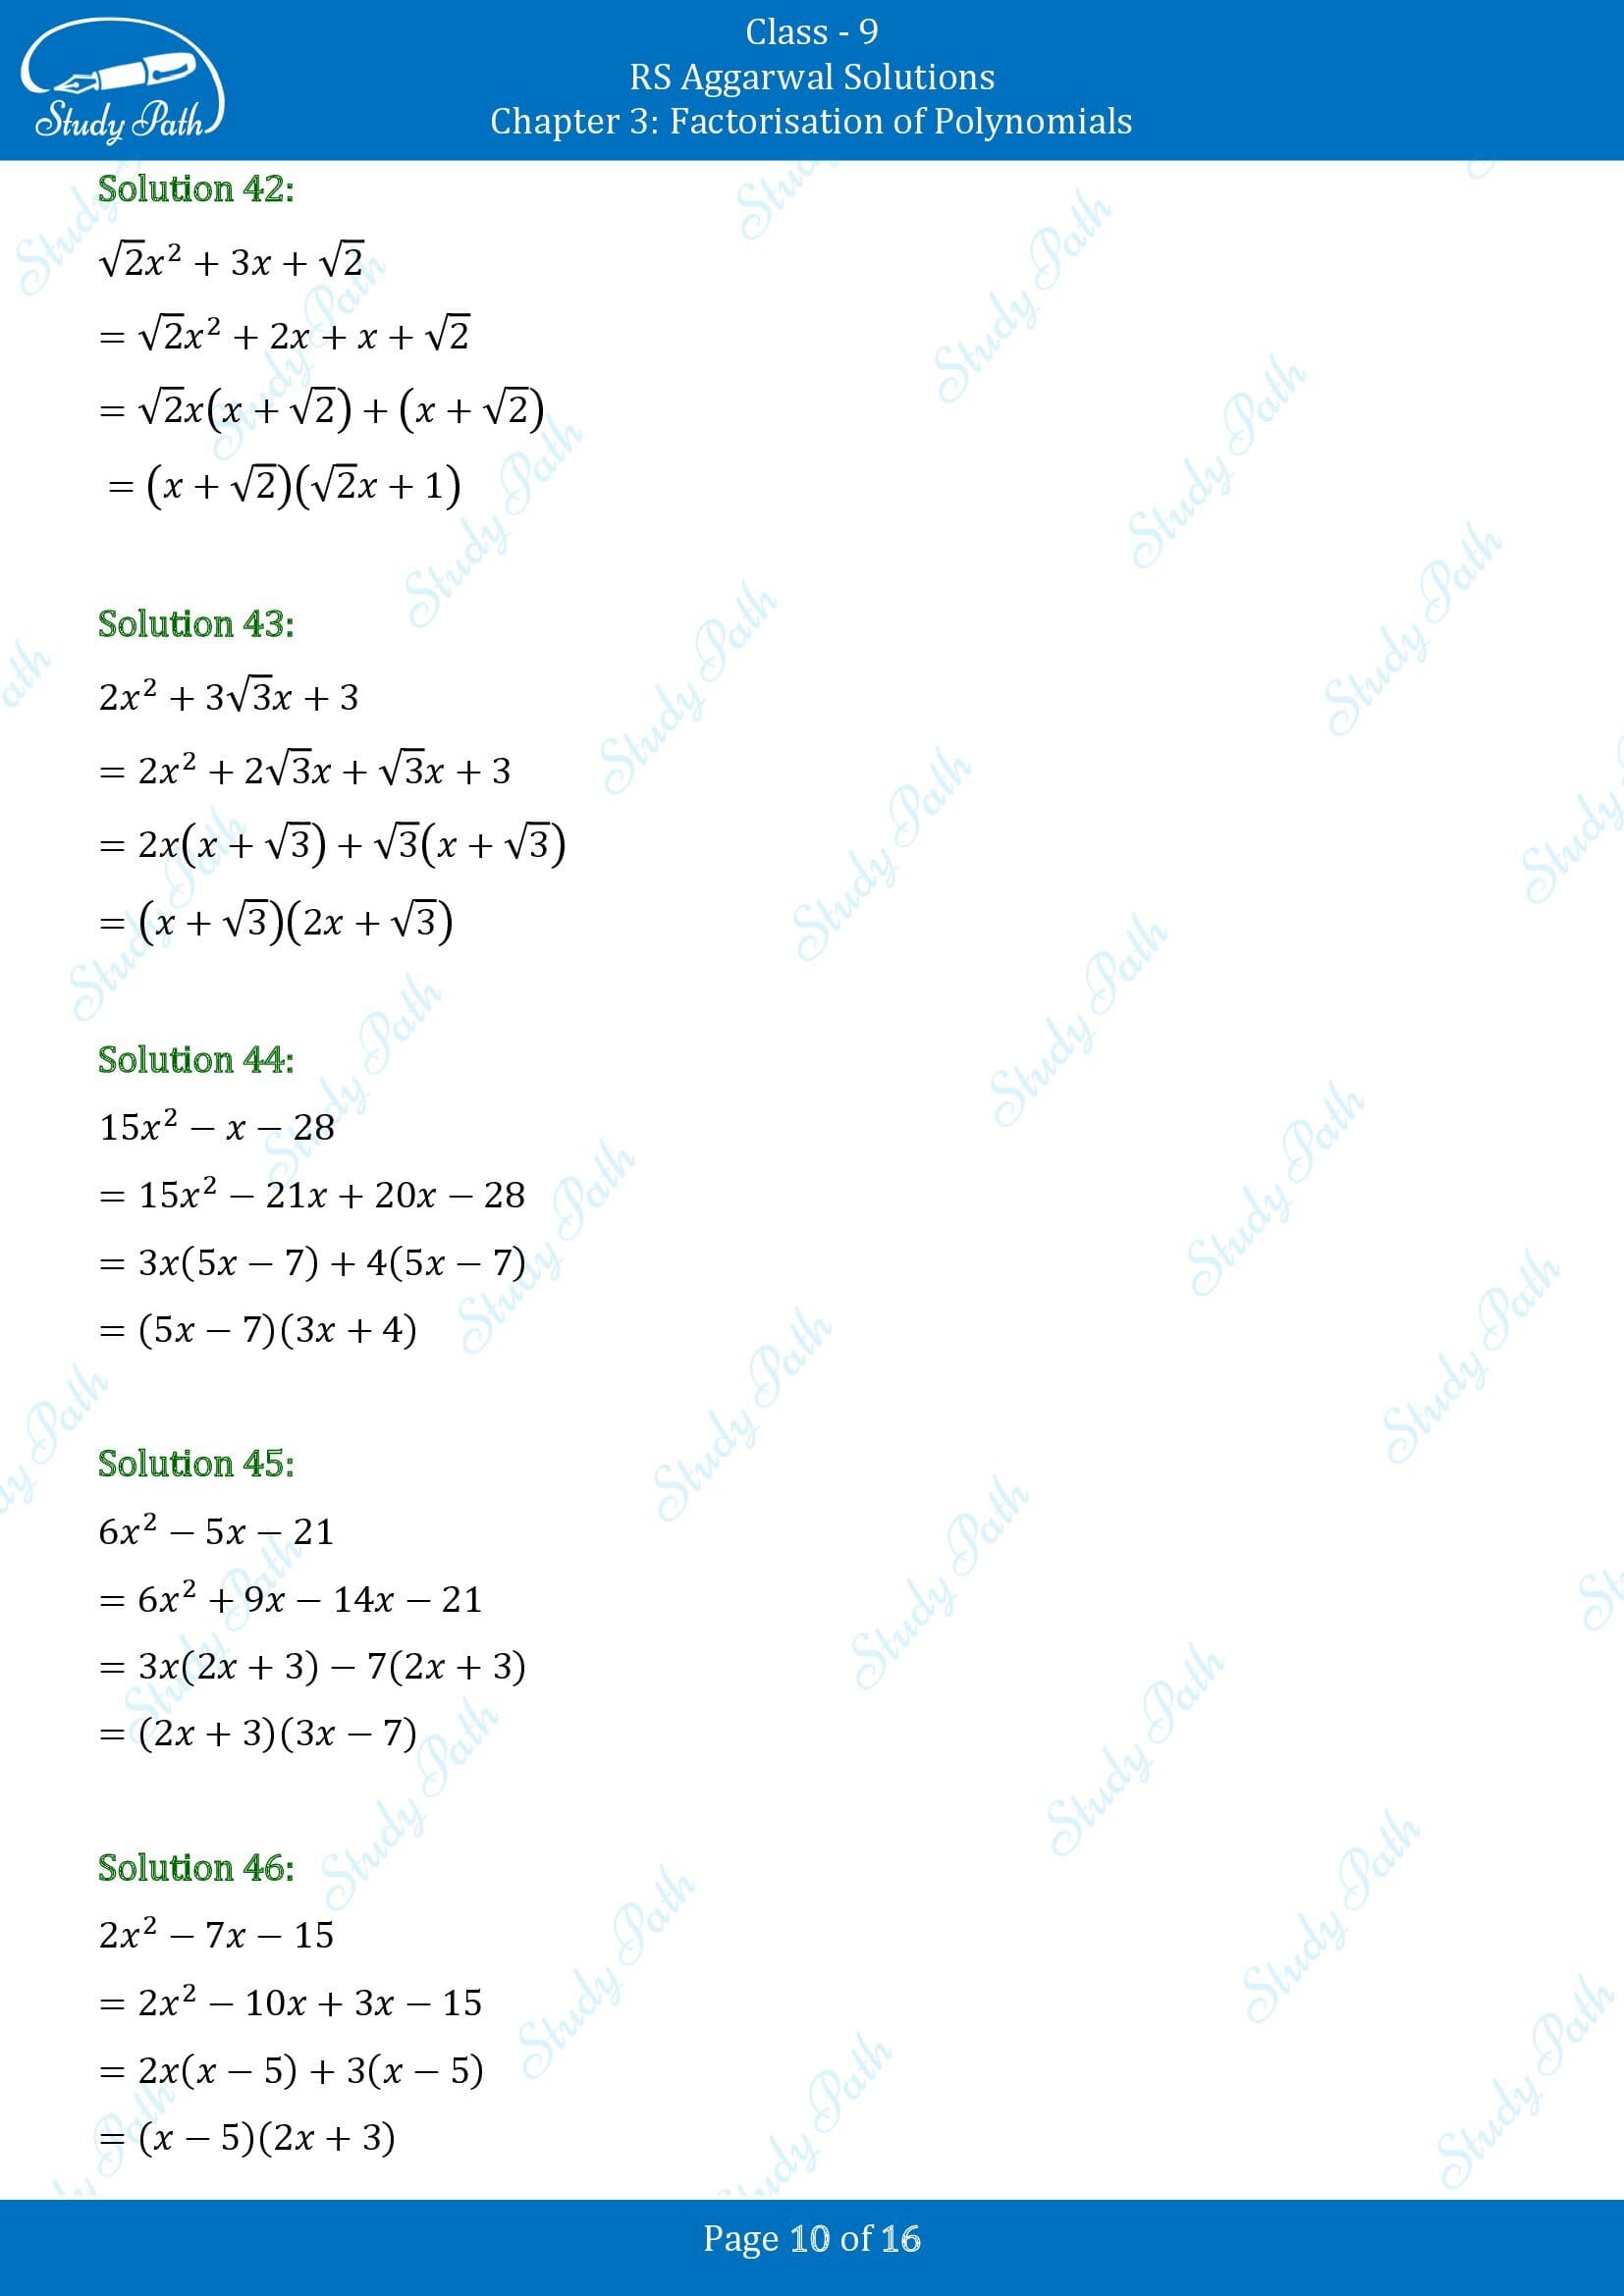 RS Aggarwal Solutions Class 9 Chapter 3 Factorisation of Polynomials Exercise 3C 00010